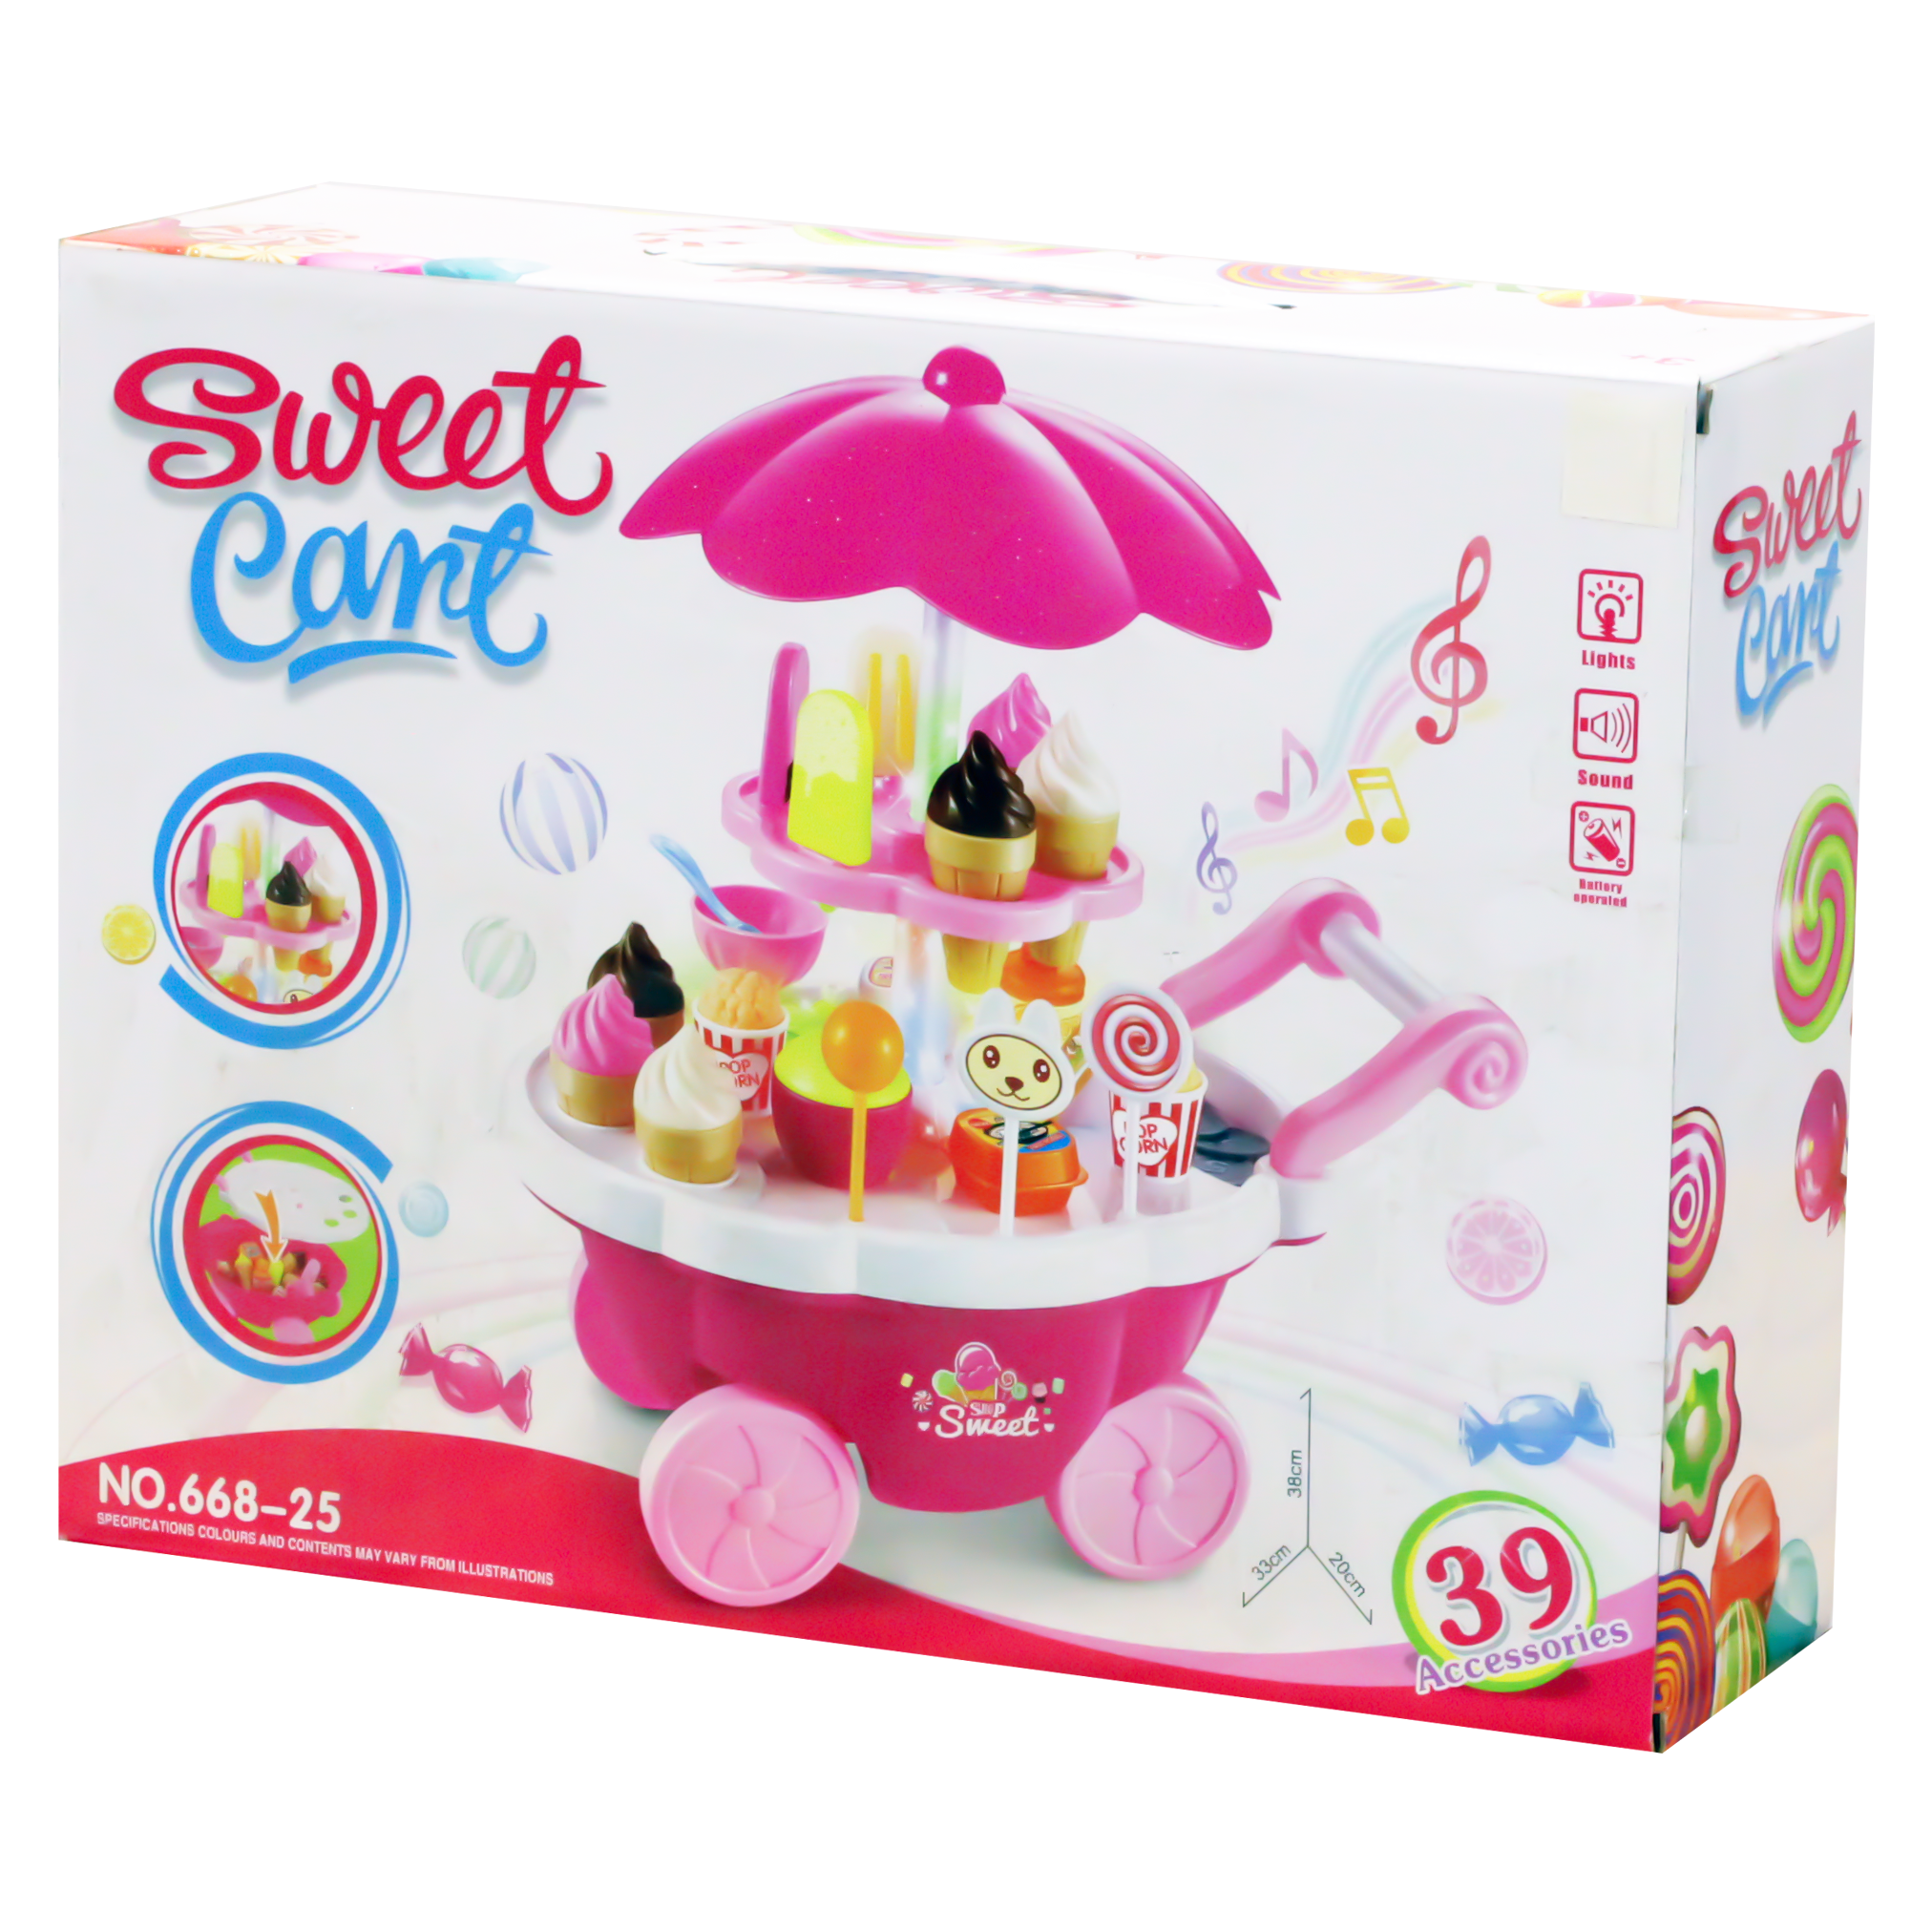 Mondeer Sweet Cart 39 Accessories Simulation Mini Trolley Ice Cream Candy Shop